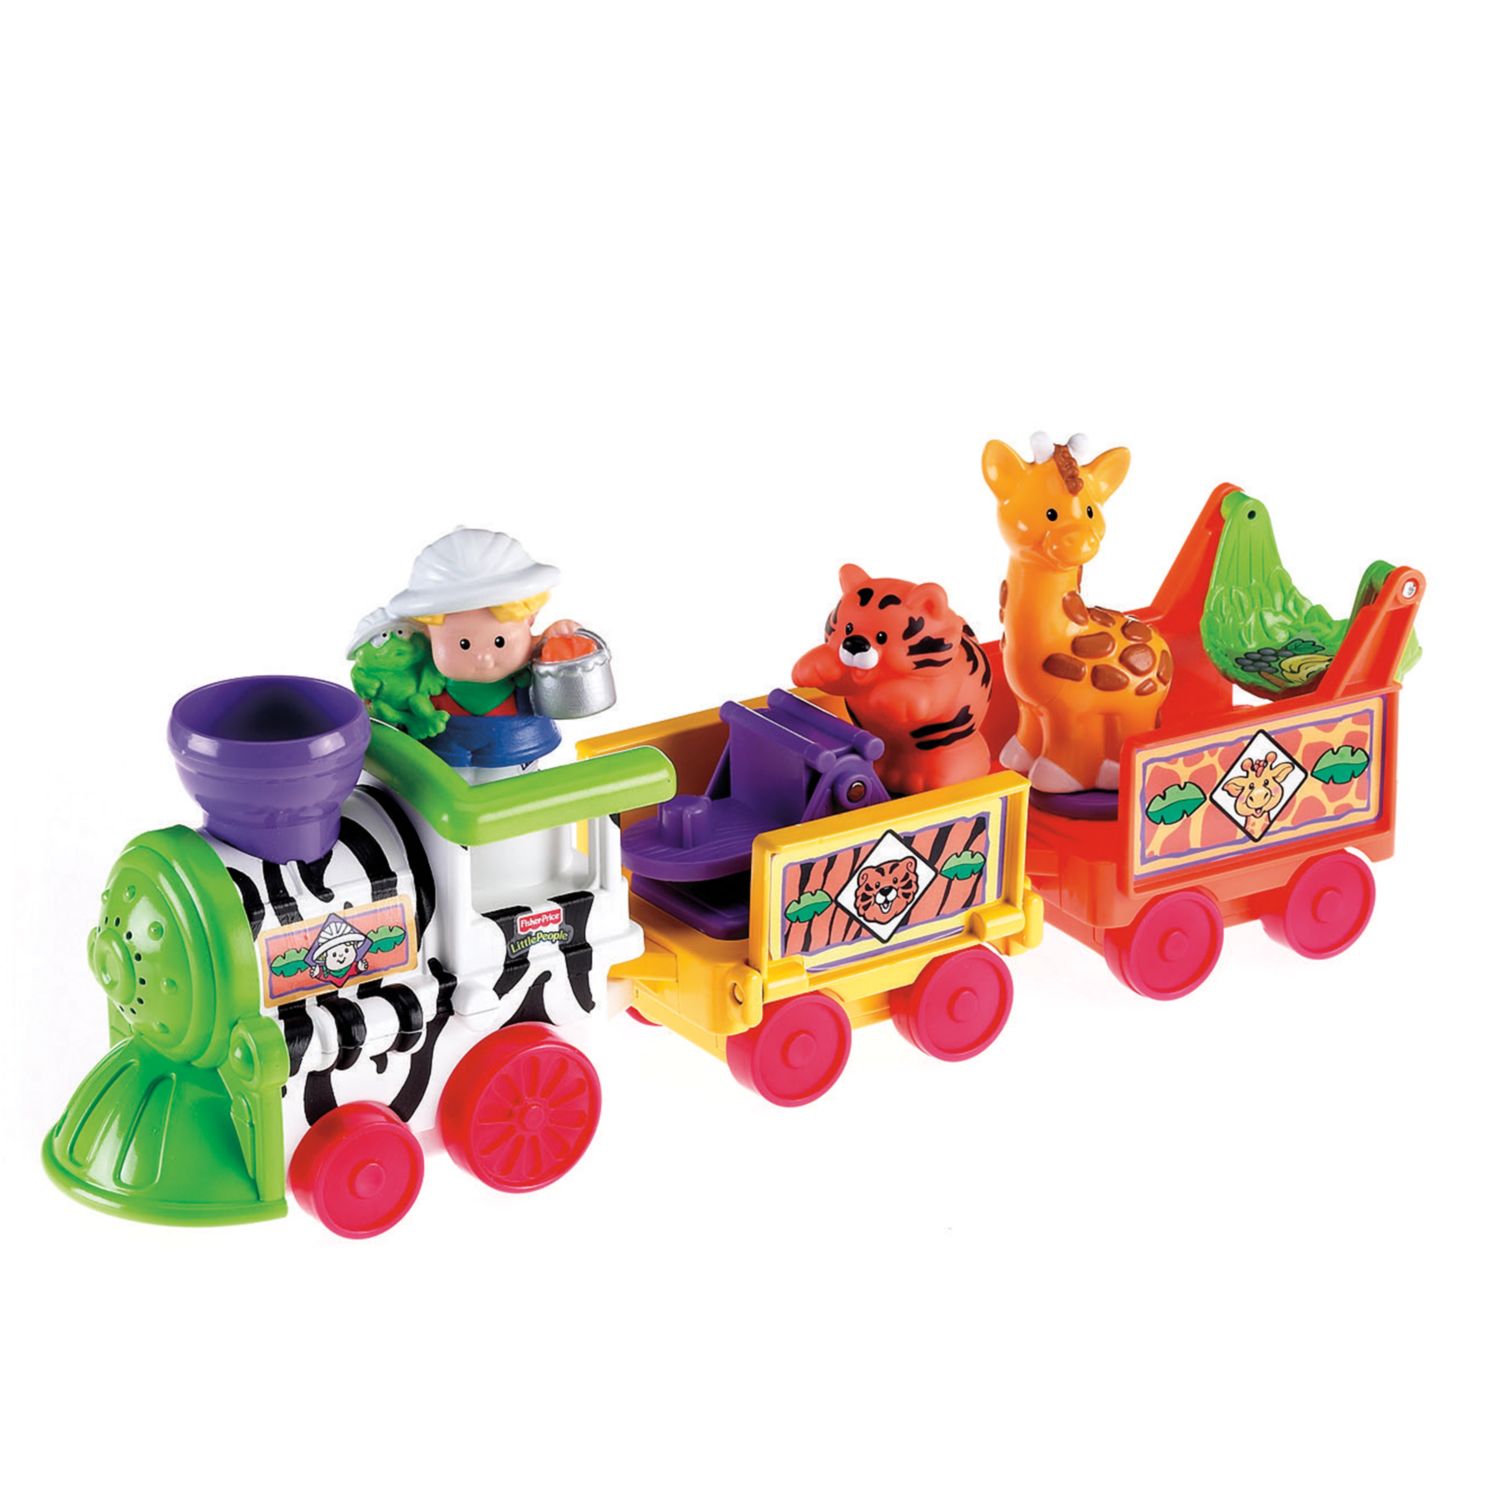 little people musical train